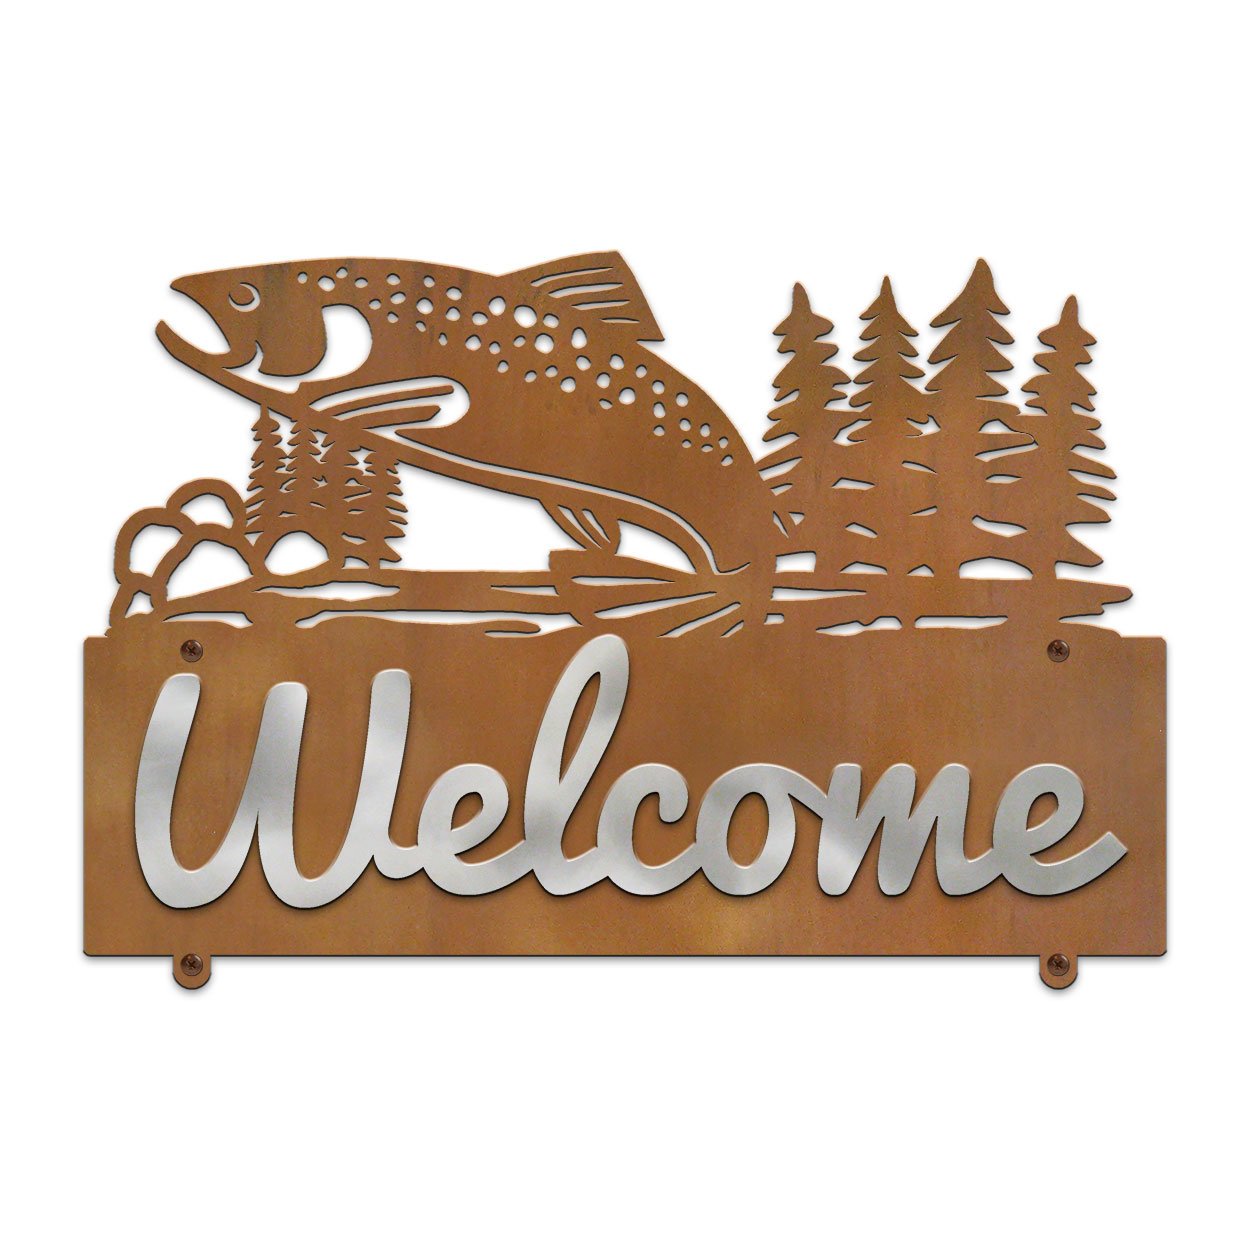 607258 - Jumping Trout in Stream Design Horizontal Metal Welcome Wall Plaque